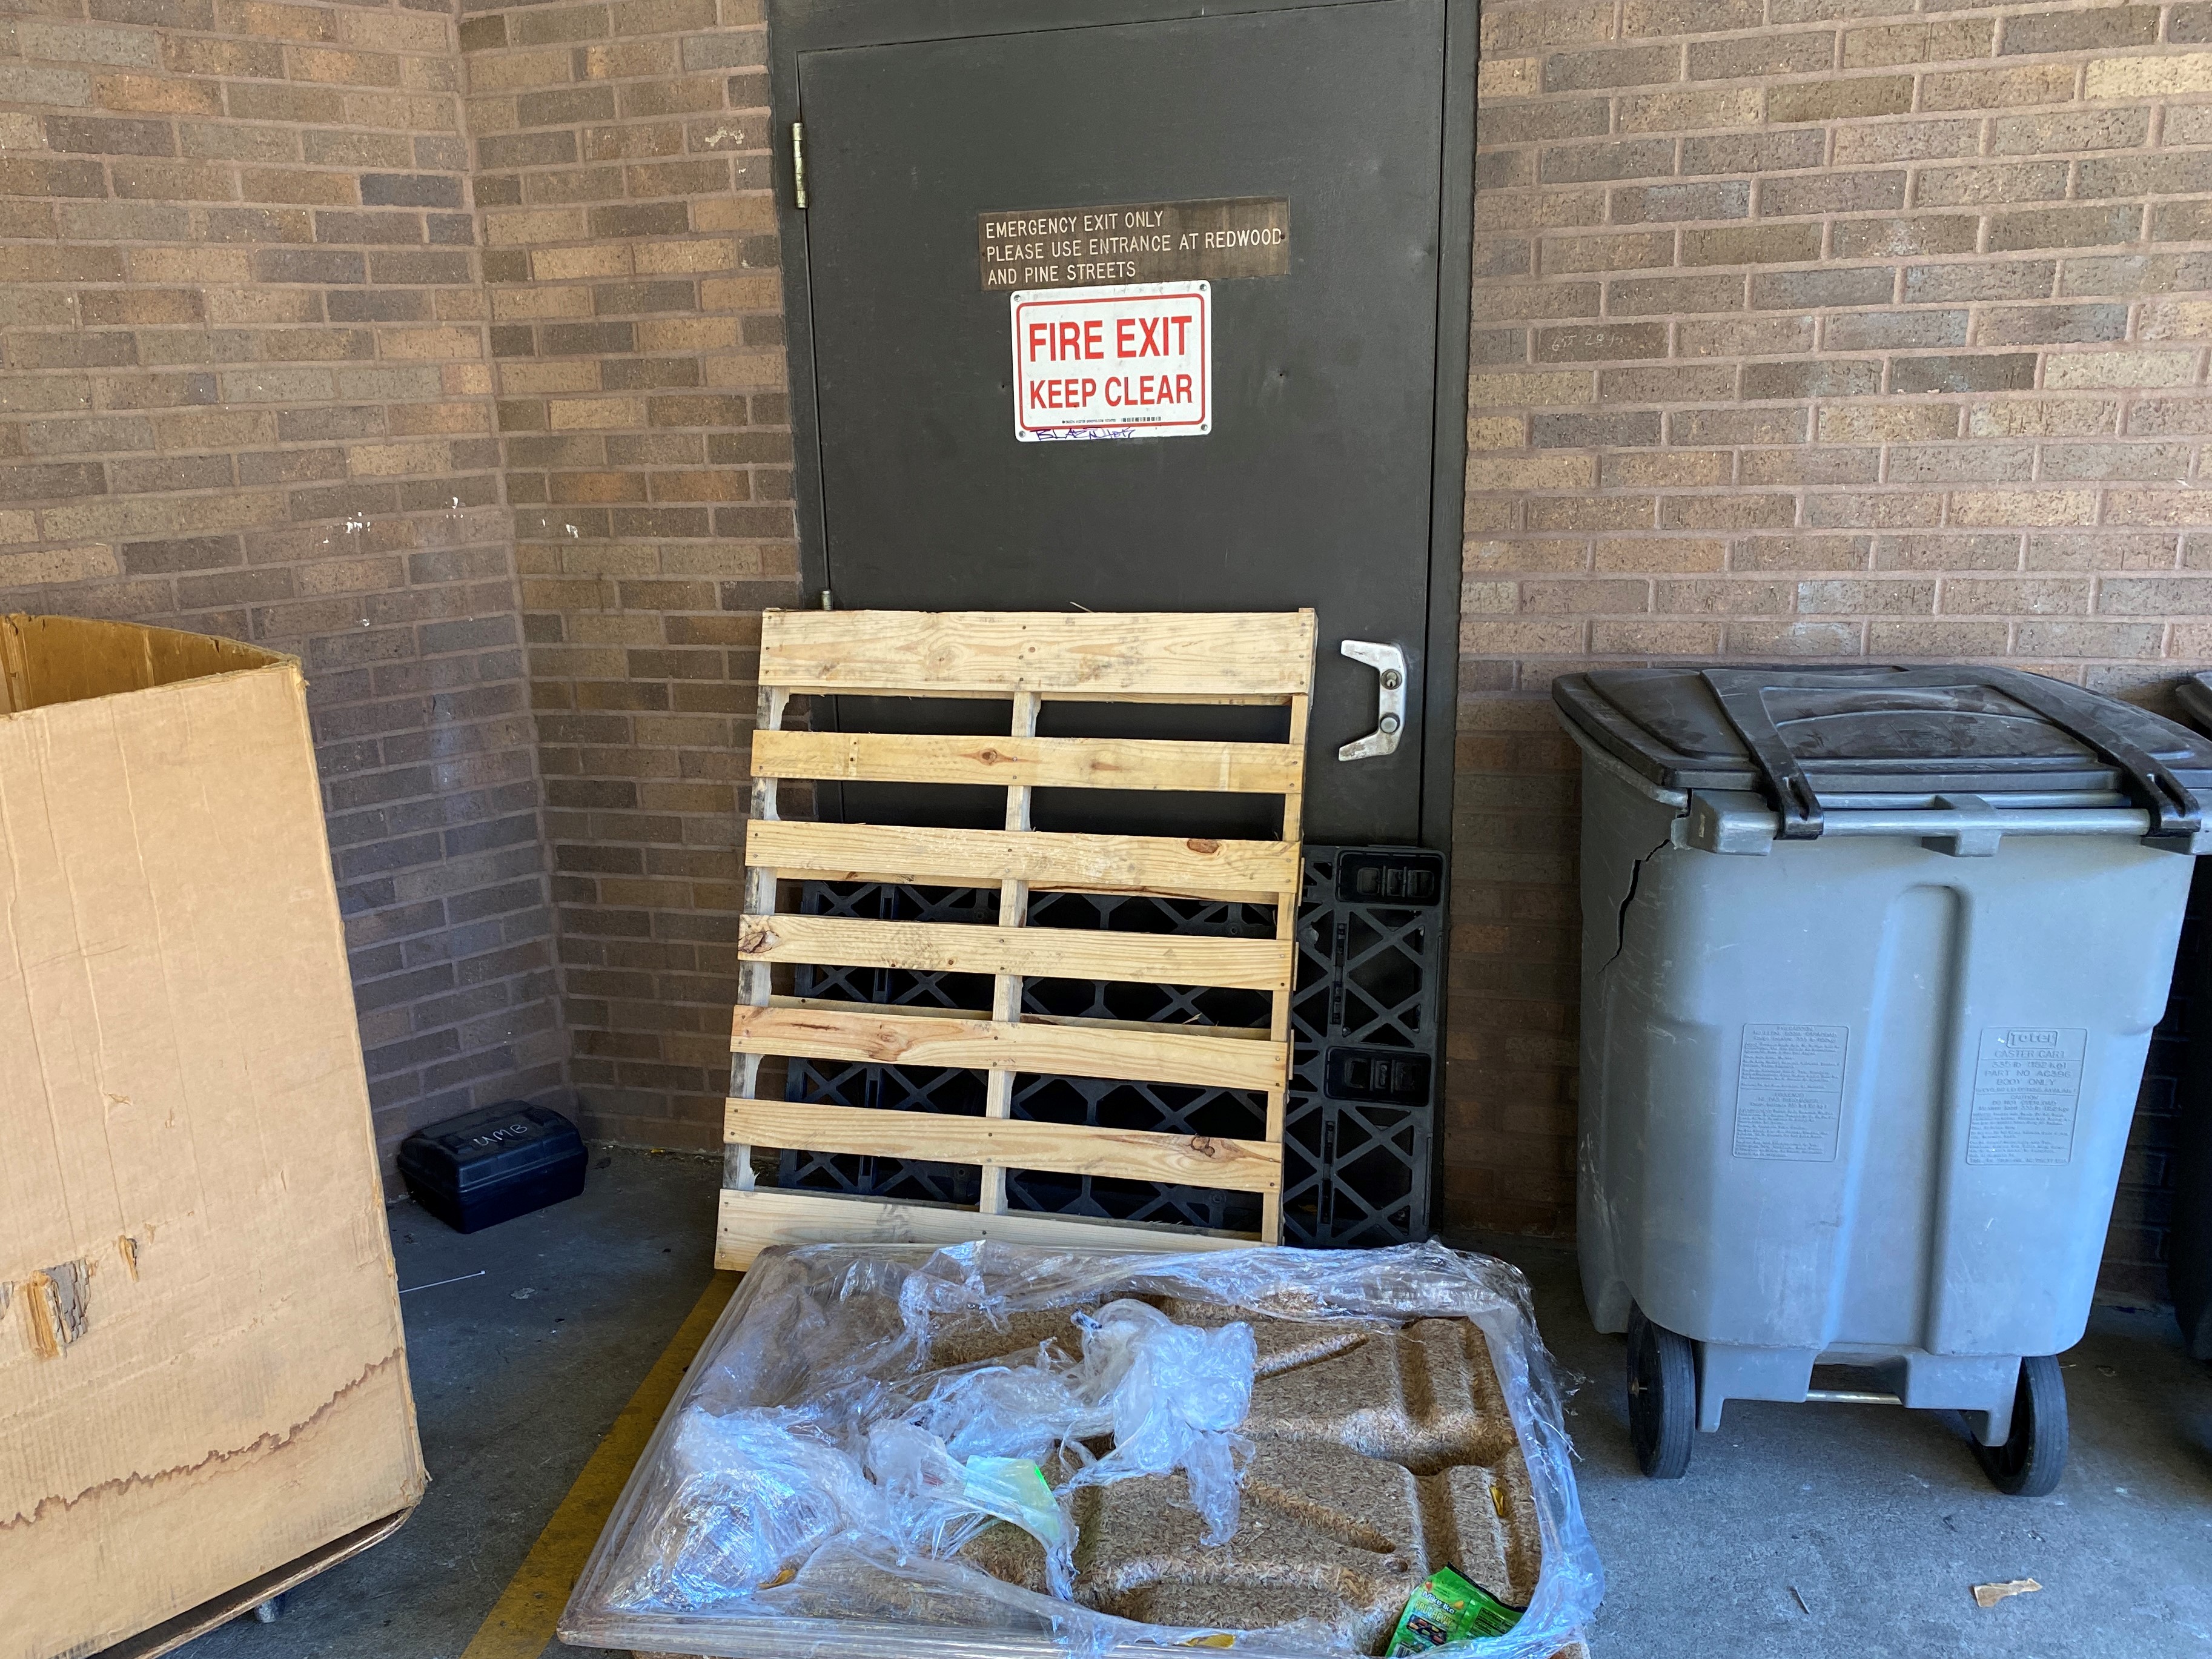 An exit door obstructed with pallets and trash.